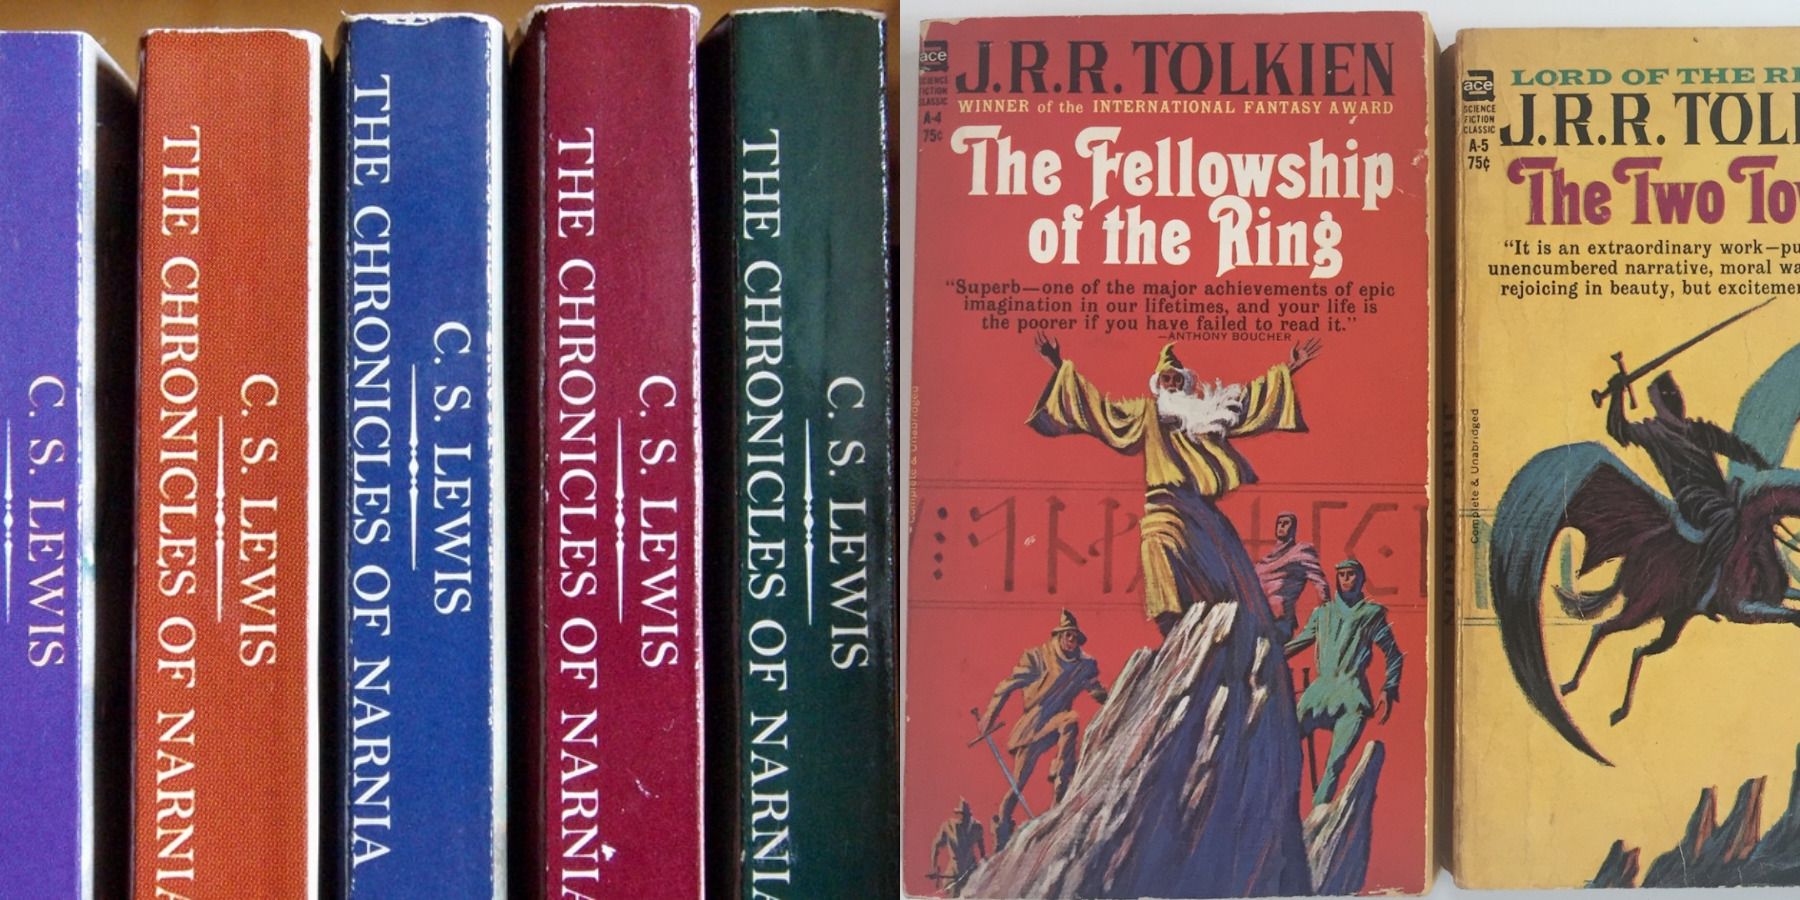 Fantasy books feature split image Chronicles of Narnia and Lord of the Rings